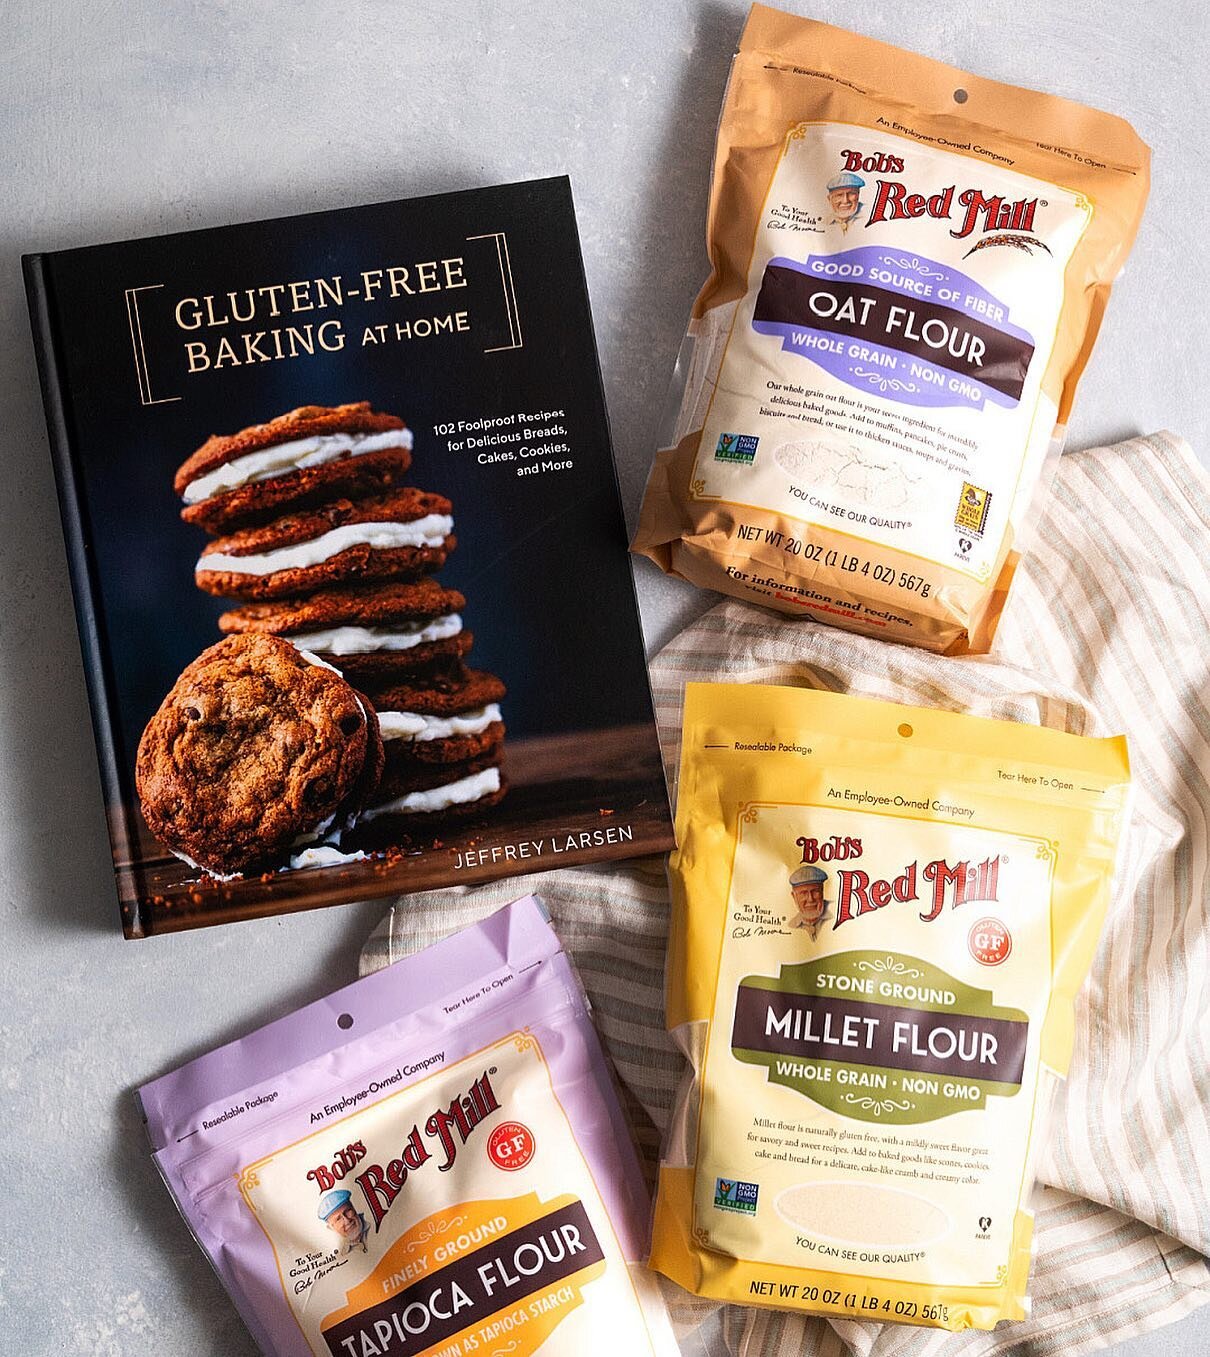 🍪 GIVEAWAY! 🍪 I've partnered up with Bob&rsquo;s Red Mill to give away the ✨ Ultimate Gluten Free Baking Experience! ✨⁠
⁠
🏆 The grand prize winner will receive a copy of the award winning book, Gluten-Free Baking at Home, $75 worth of gluten free 